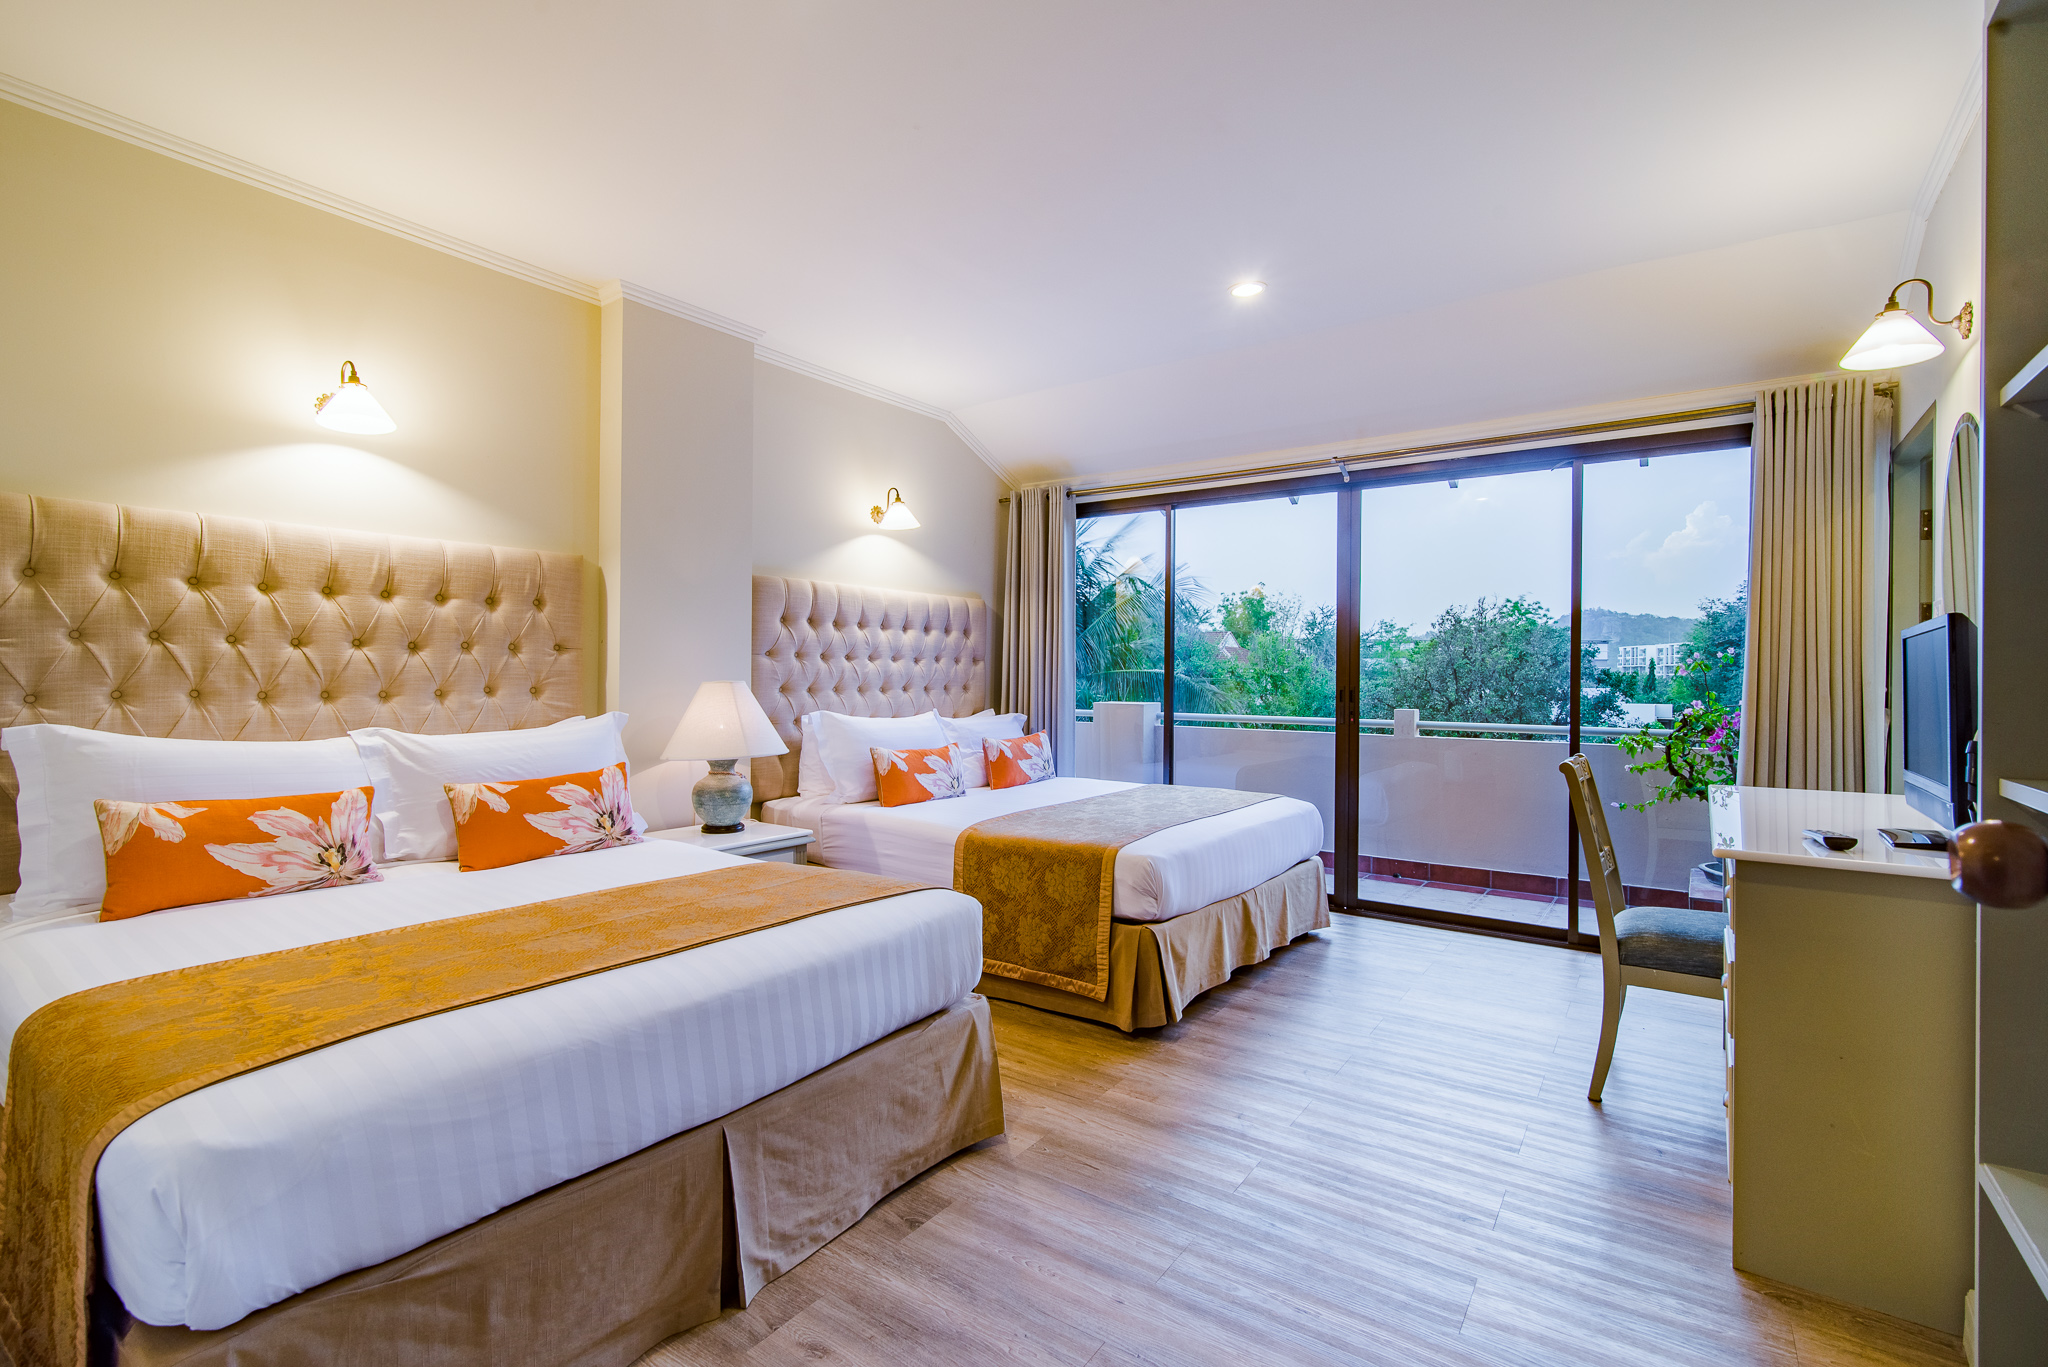 Anantasila offers a variety of Family suites which are ideal for small families or long term guests. All have full cooking facilities and living areas. Larger than our standard rooms, the Family suites provide extra comfort and versatility.